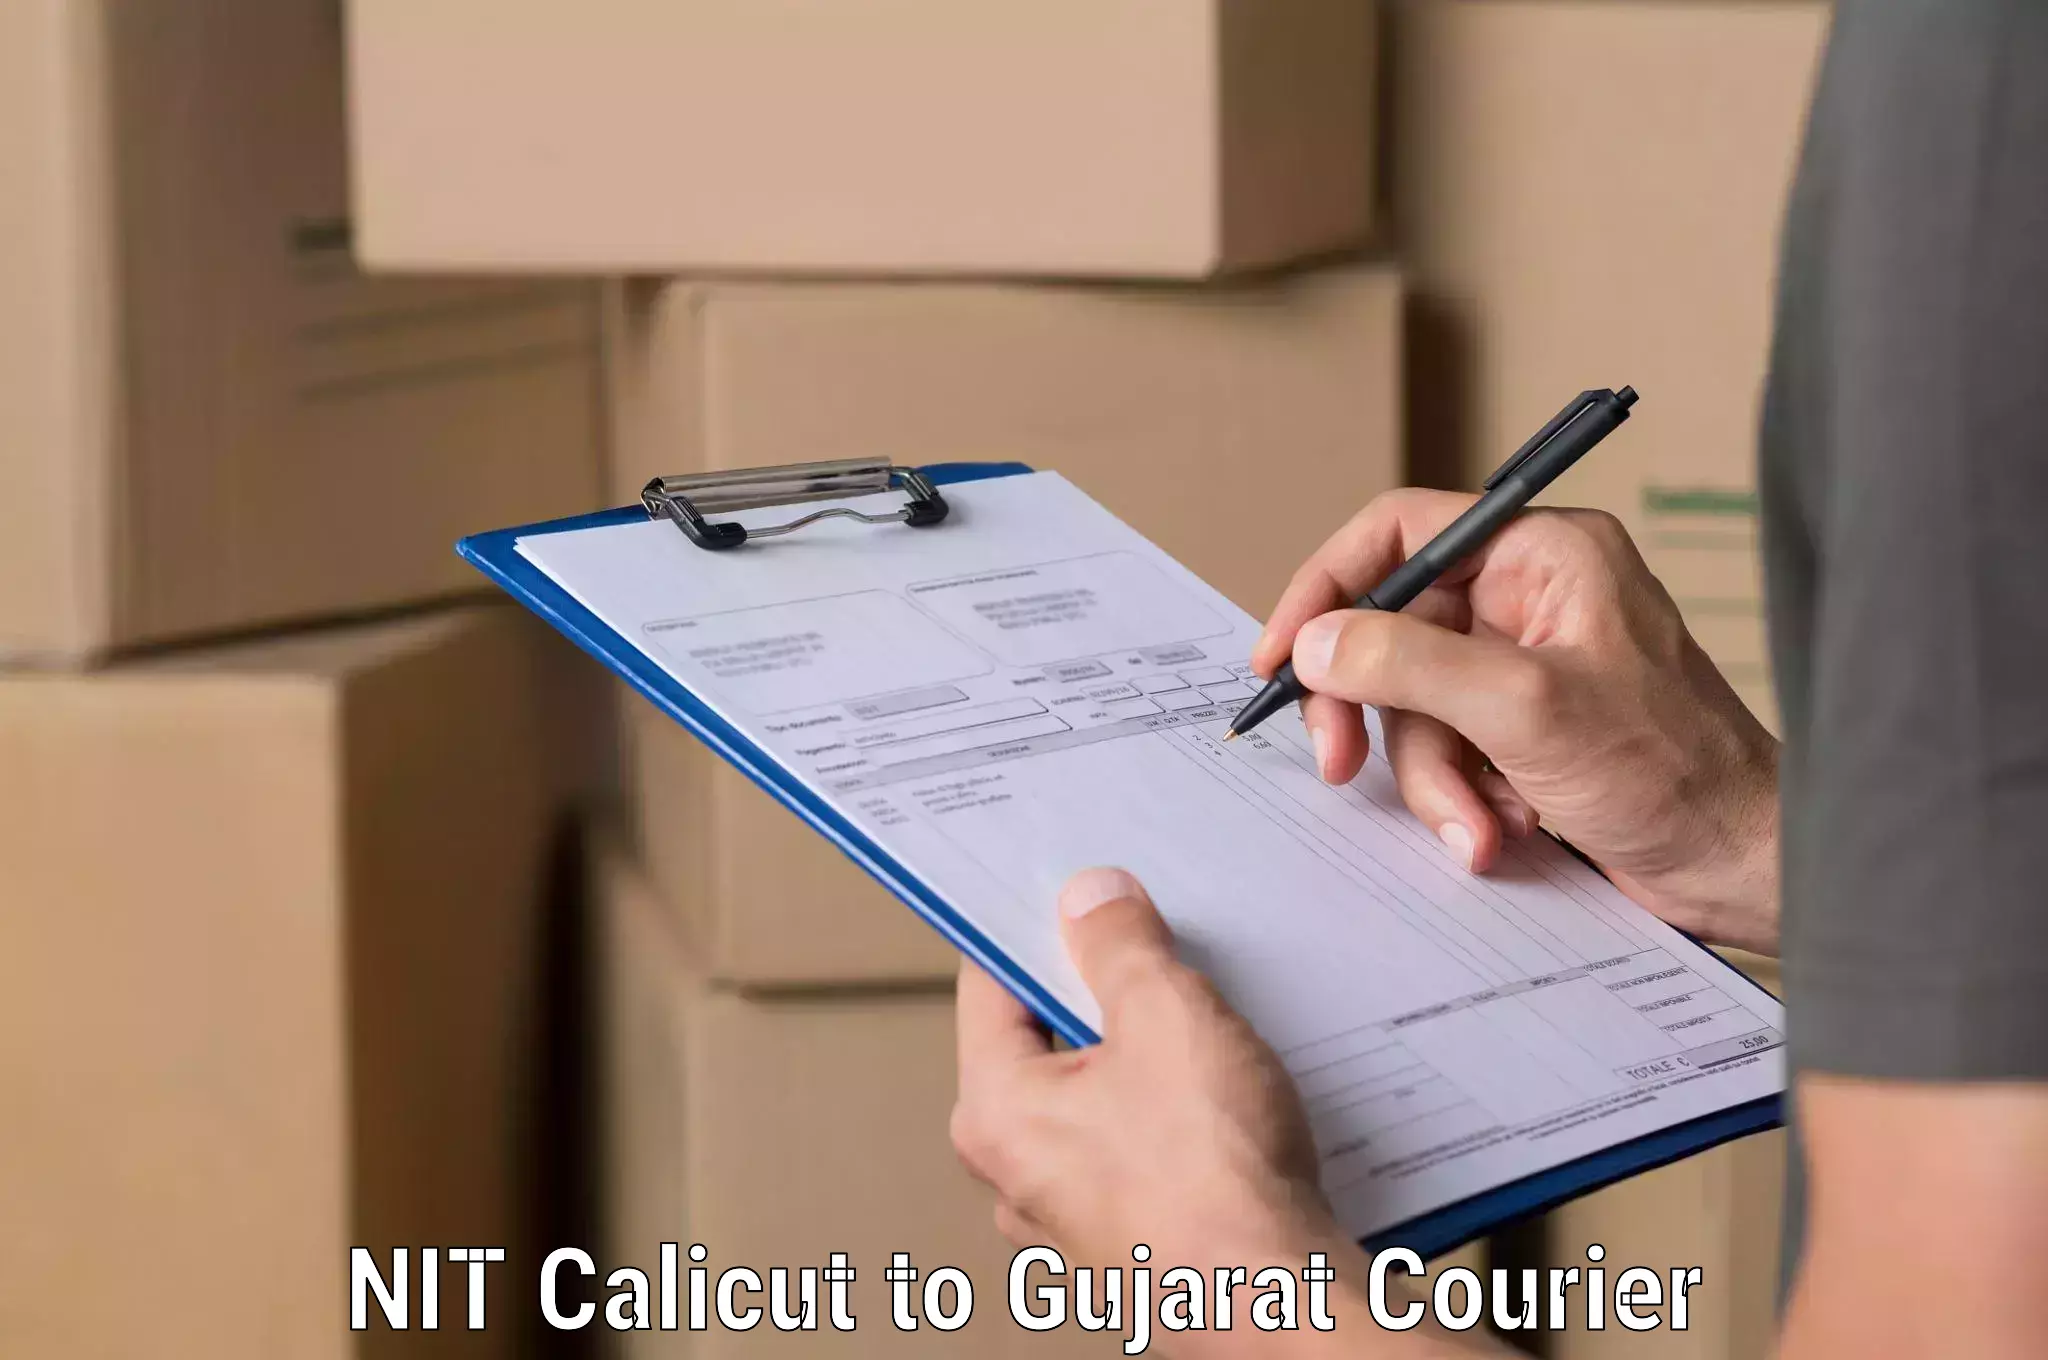 Courier service partnerships NIT Calicut to Ahmedabad